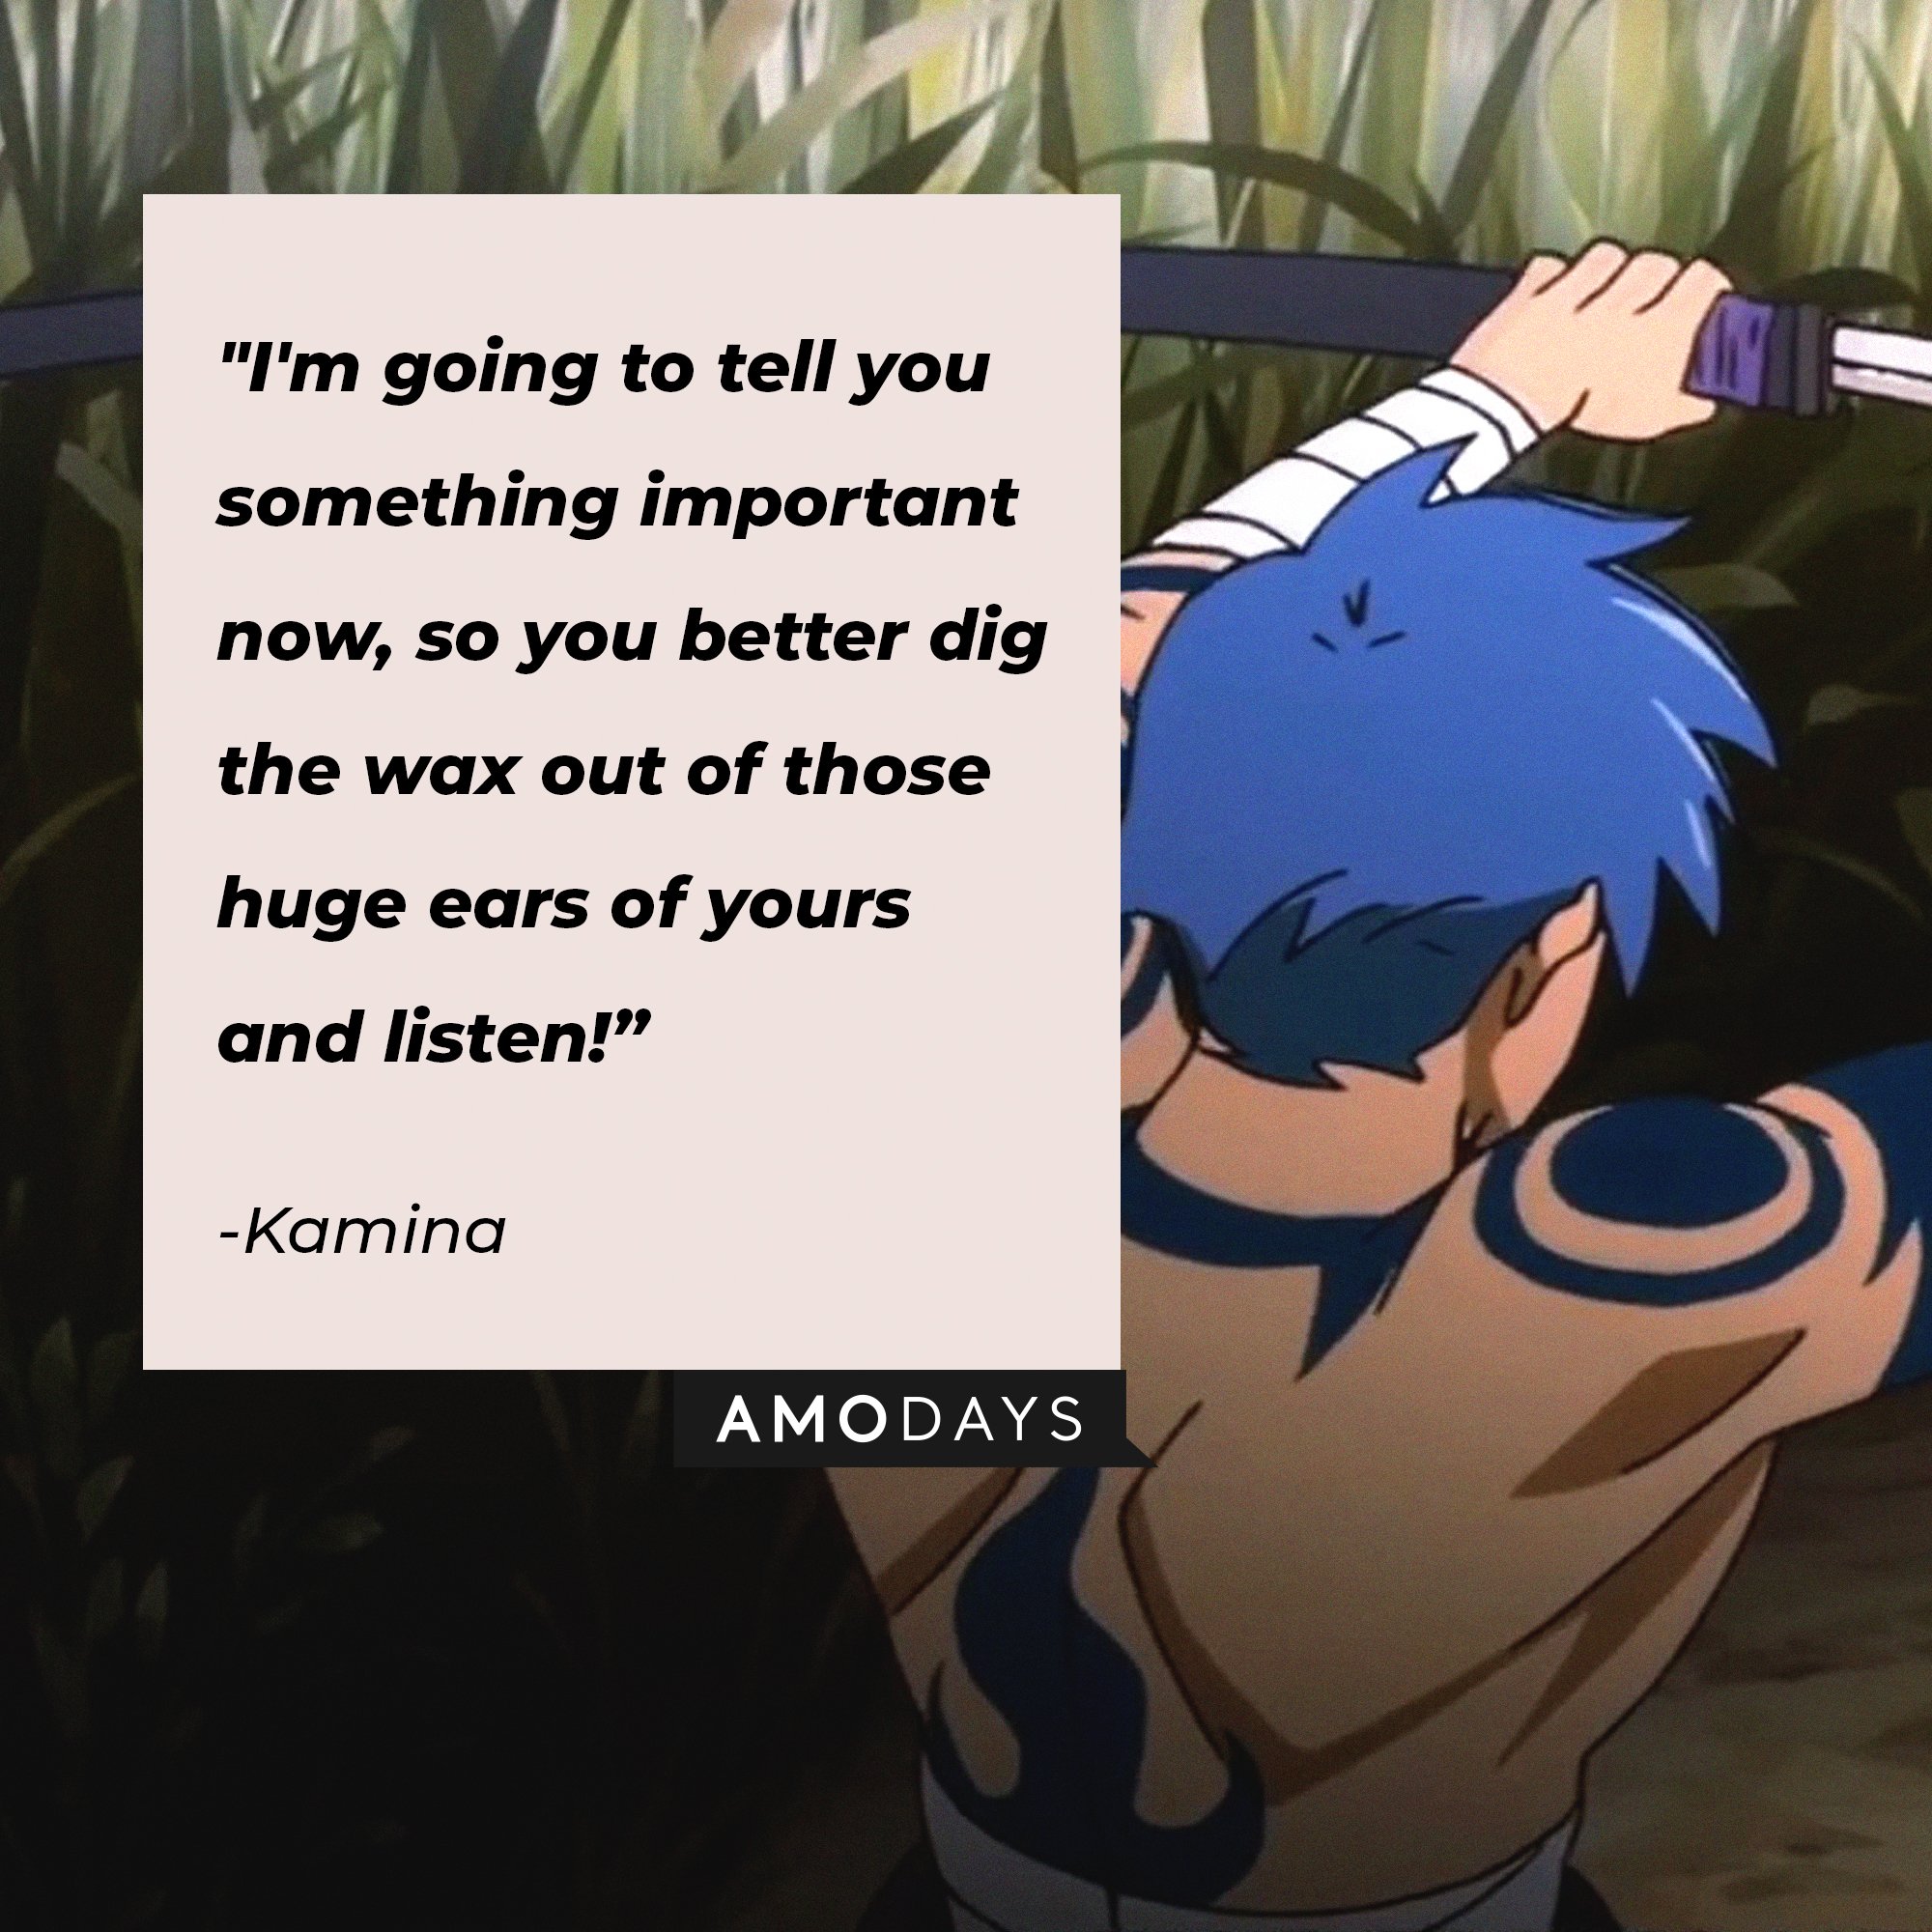 Kamina's quote: "I'm going to tell you something important now, so you better dig the wax out of those huge ears of yours and listen!" | Image: AmoDays  